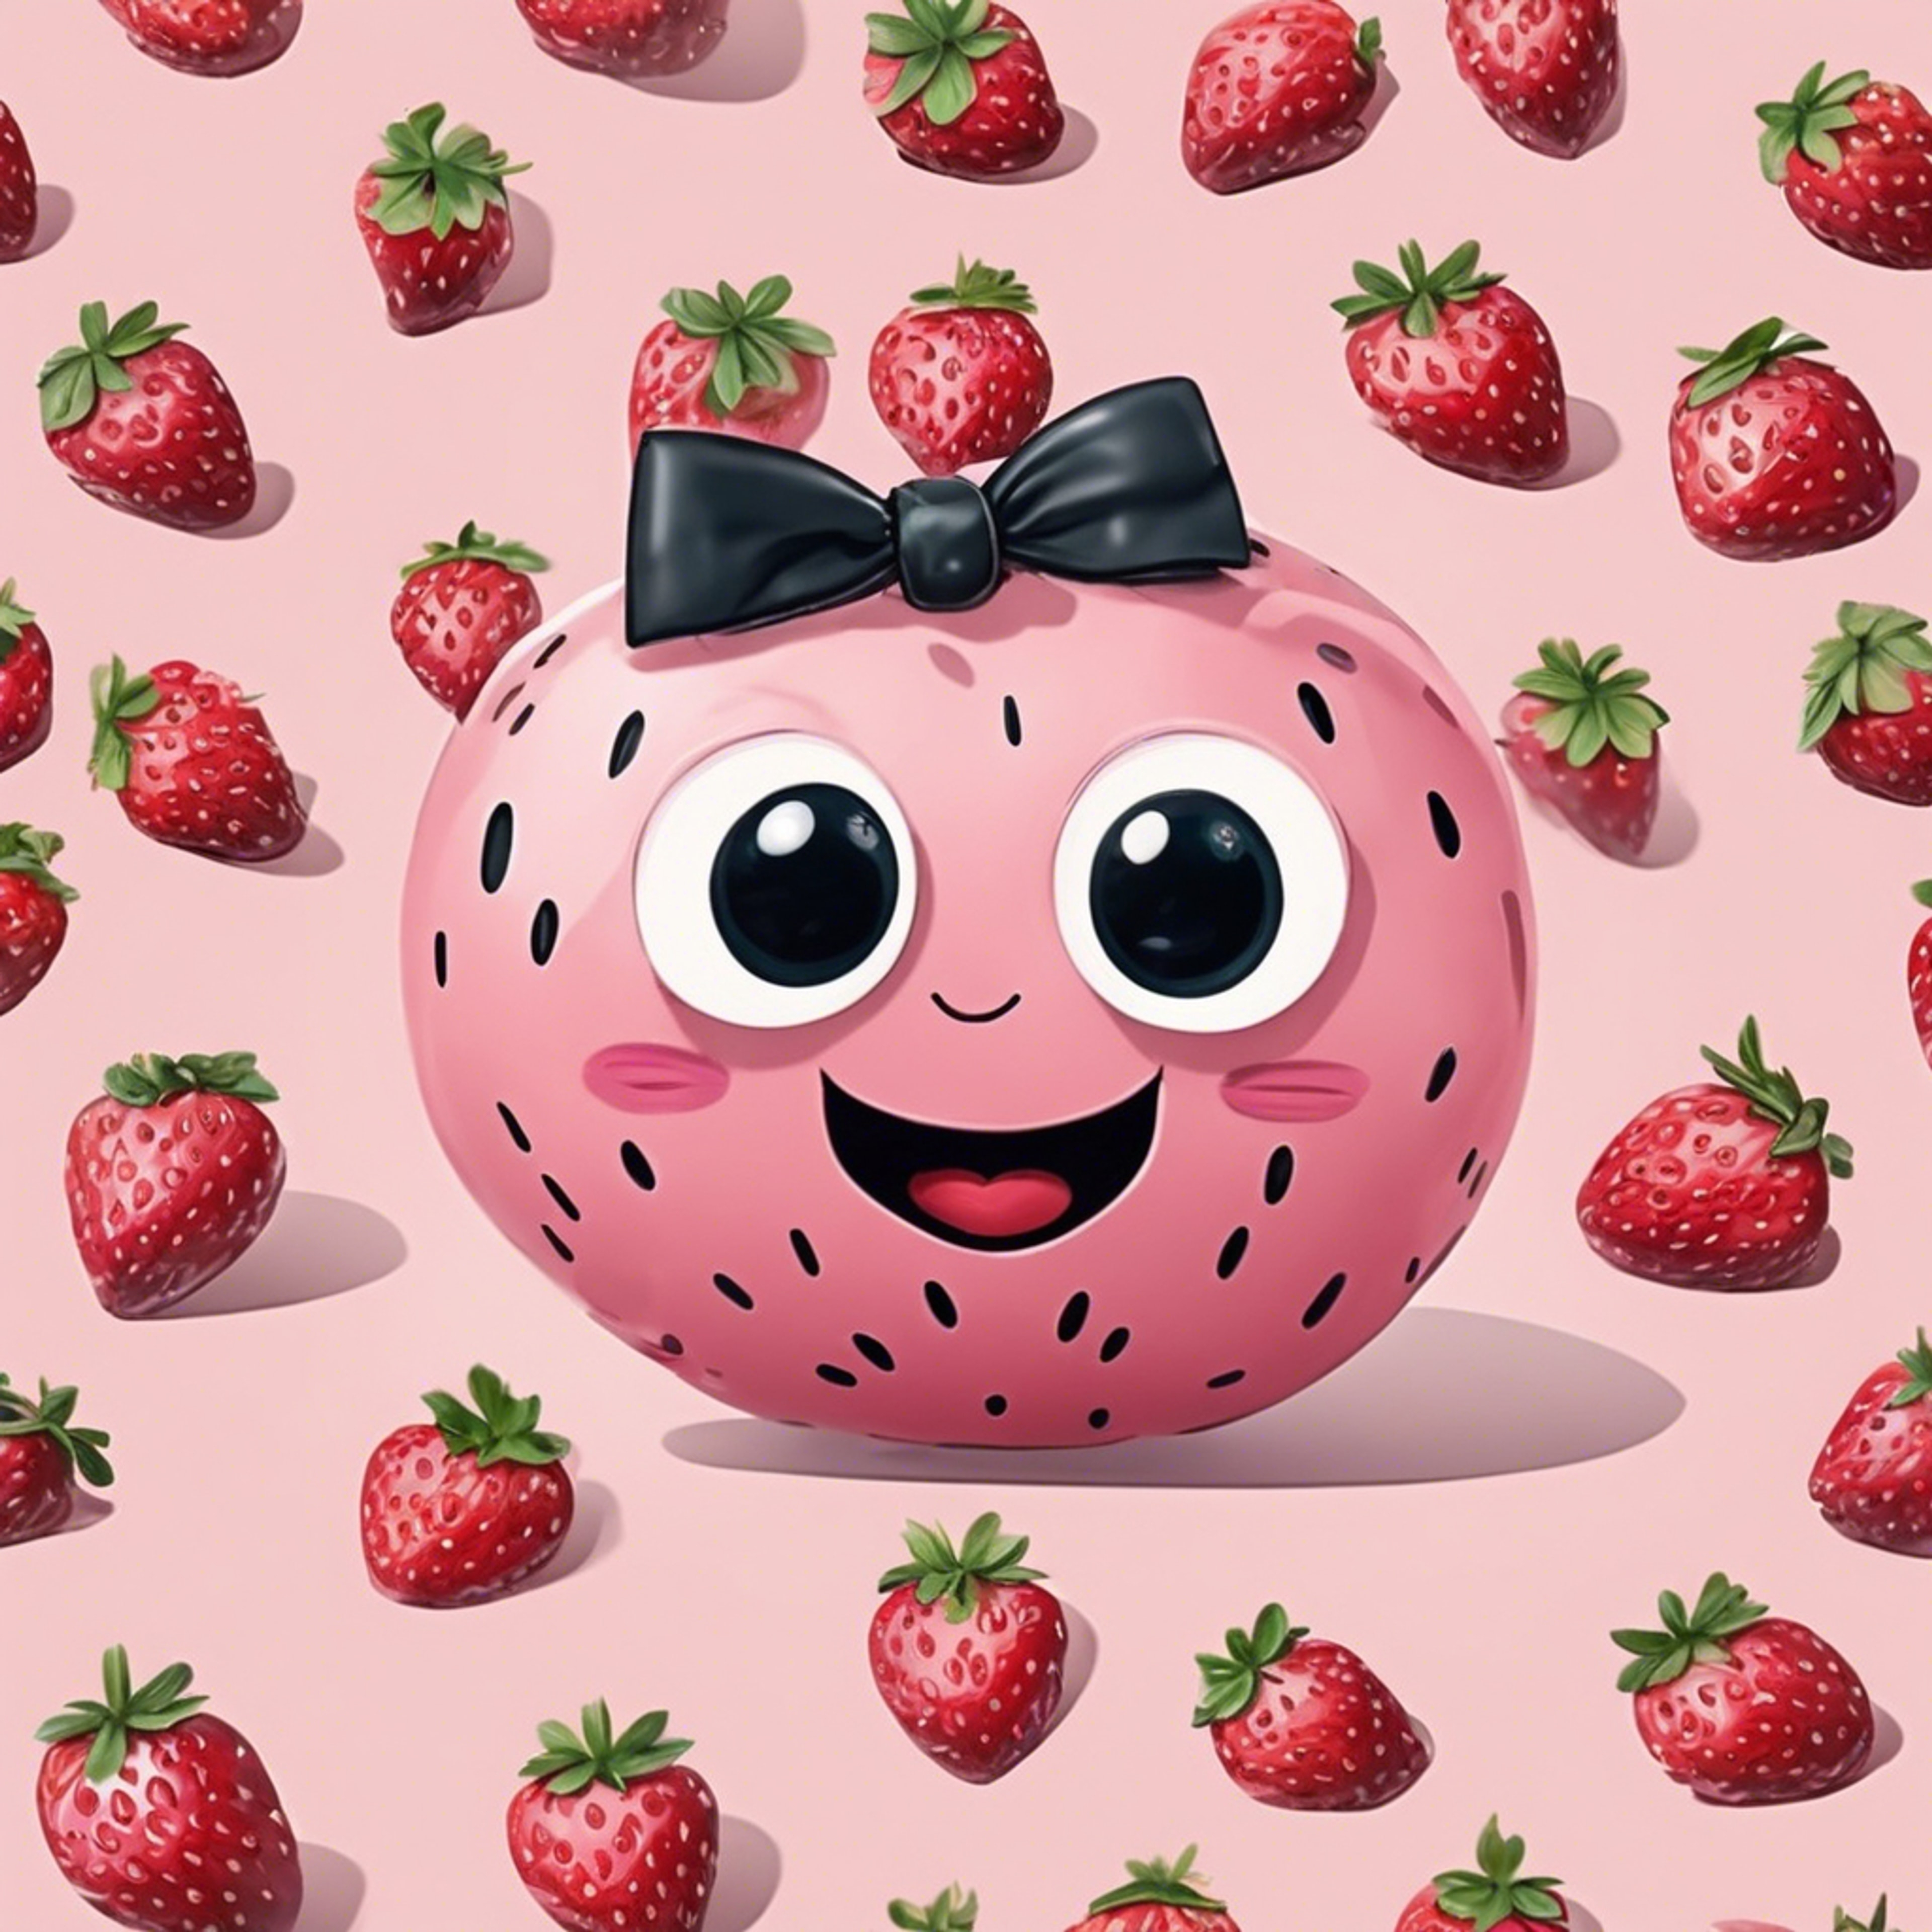 Cute, smiling light pink kawaii strawberries with big eyes and little bow ties.壁紙[24a5e2efca874b08b7f4]